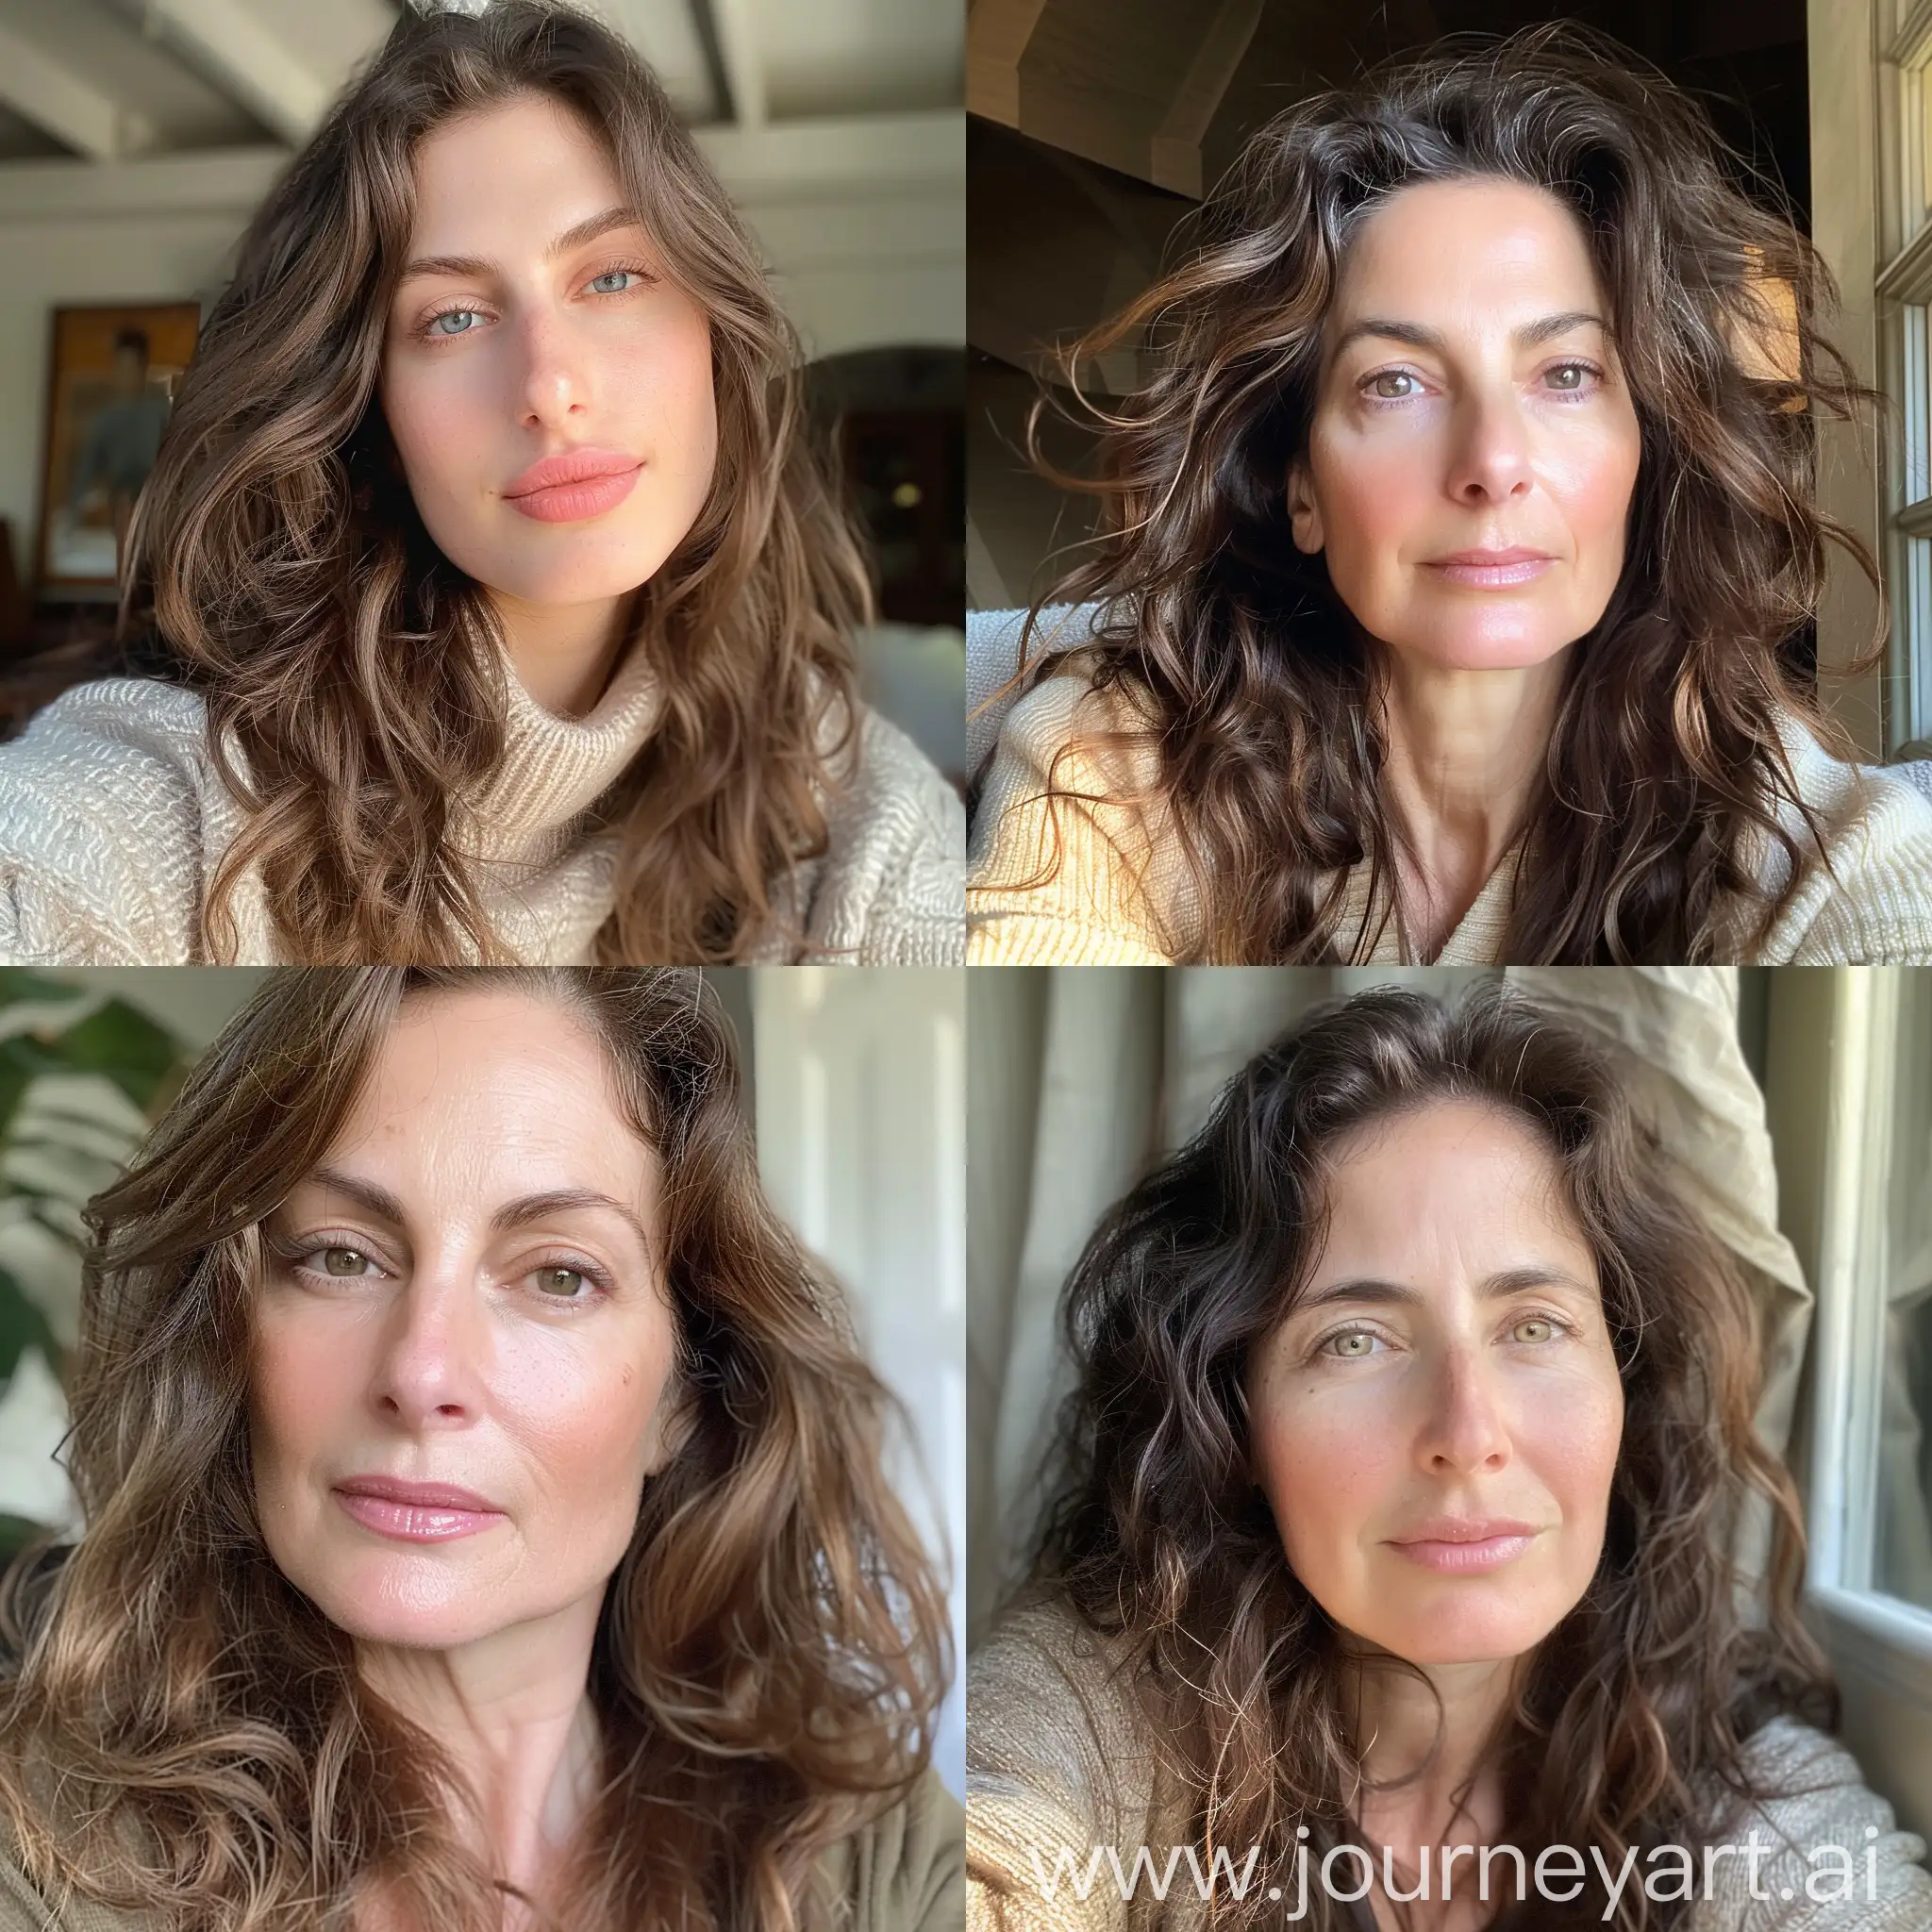 Aesthetic-Instagram-Selfie-of-a-Jewish-Mother-with-Wavy-Brown-Hair